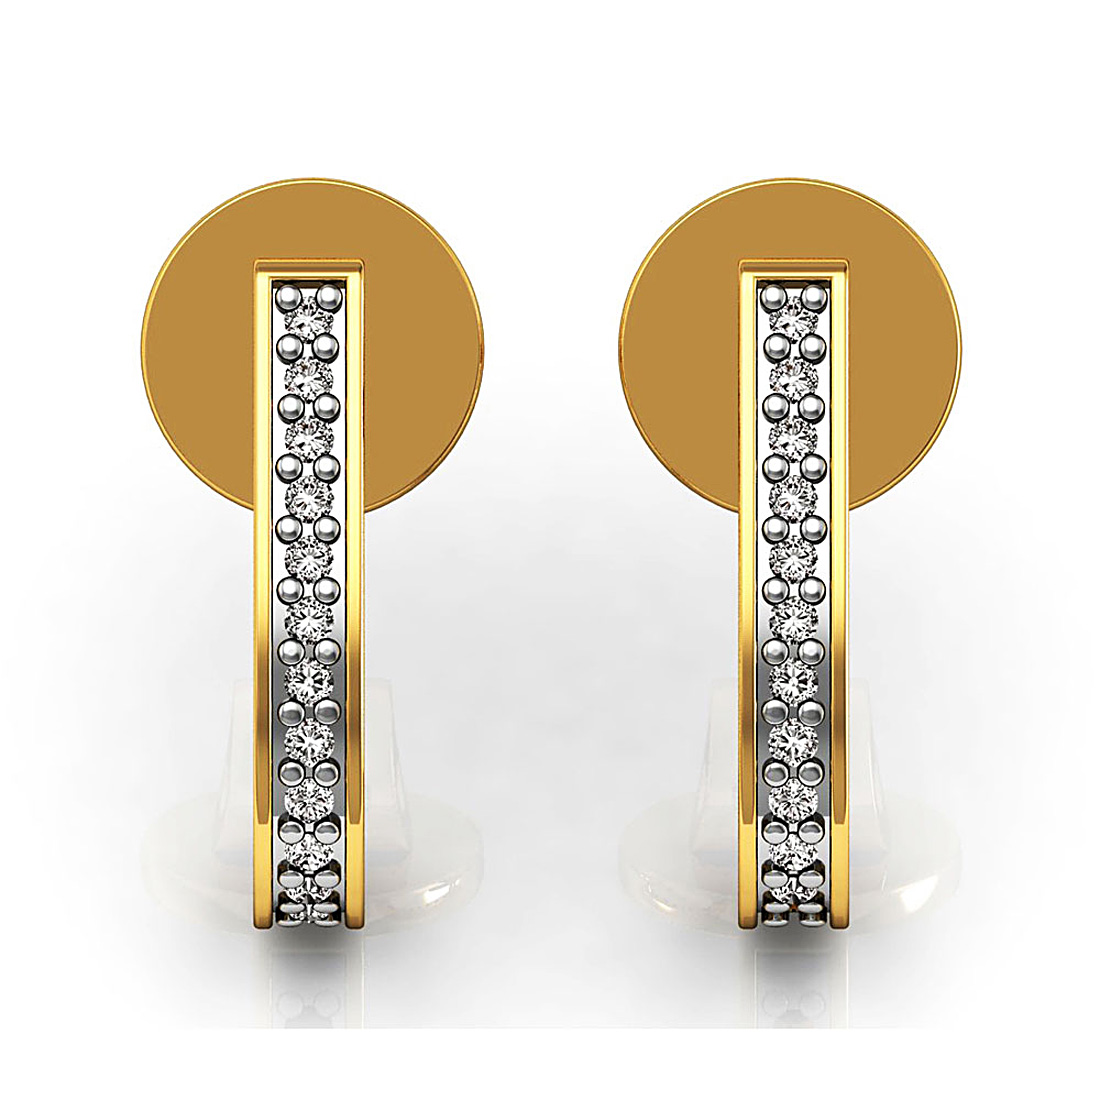 Natural diamond stud earrings made in 18k solid gold